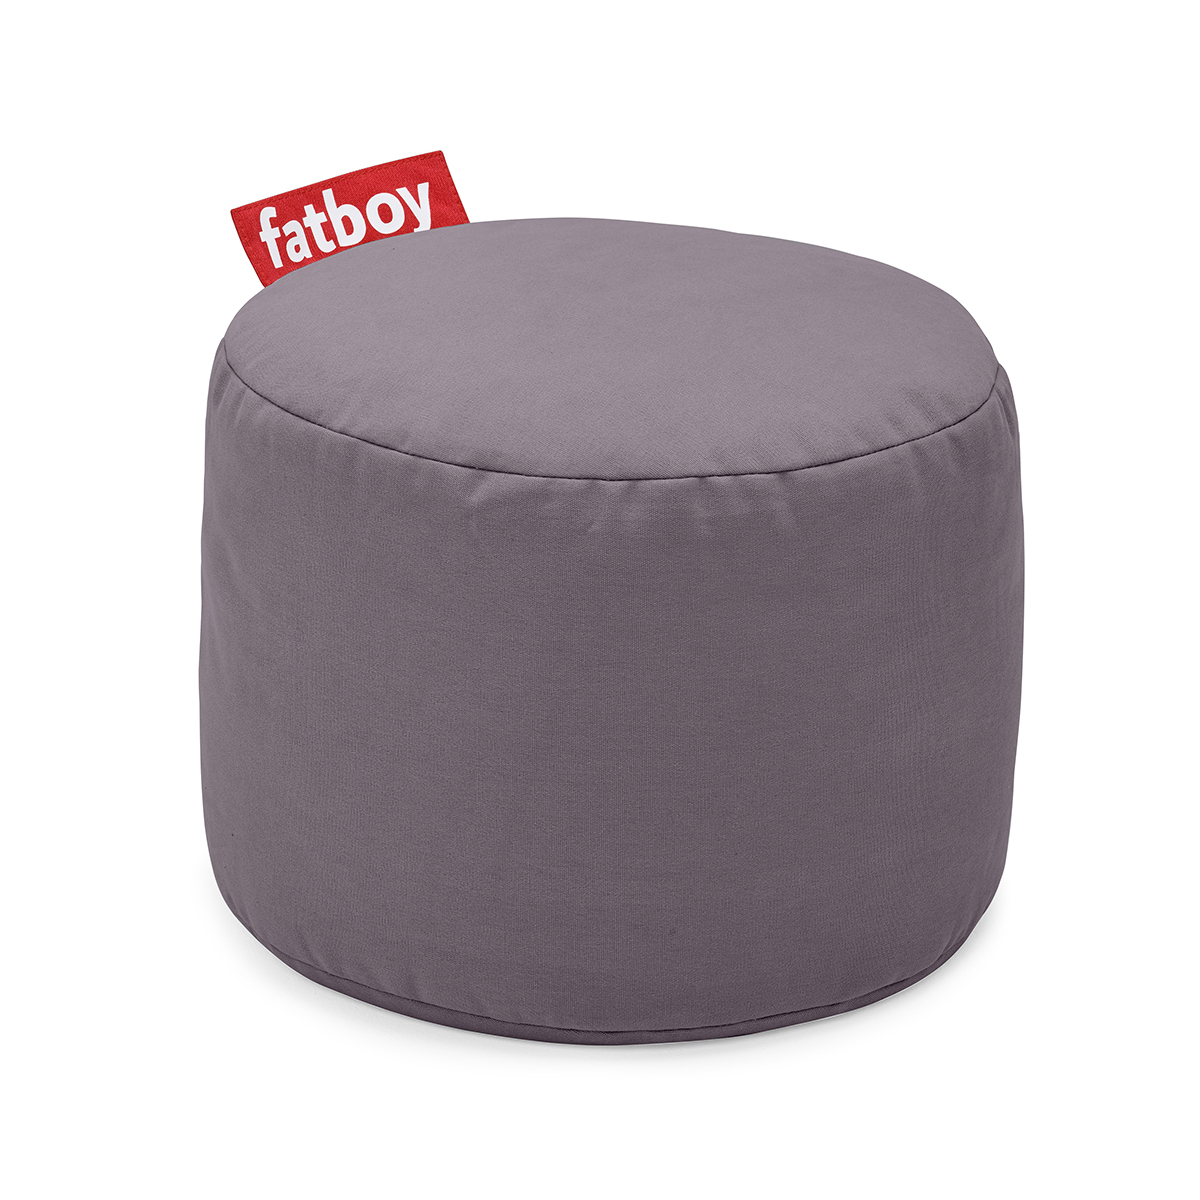 Eed Dierentuin verstoring Fatboy poufs for the bedroom or living room | Fatboy